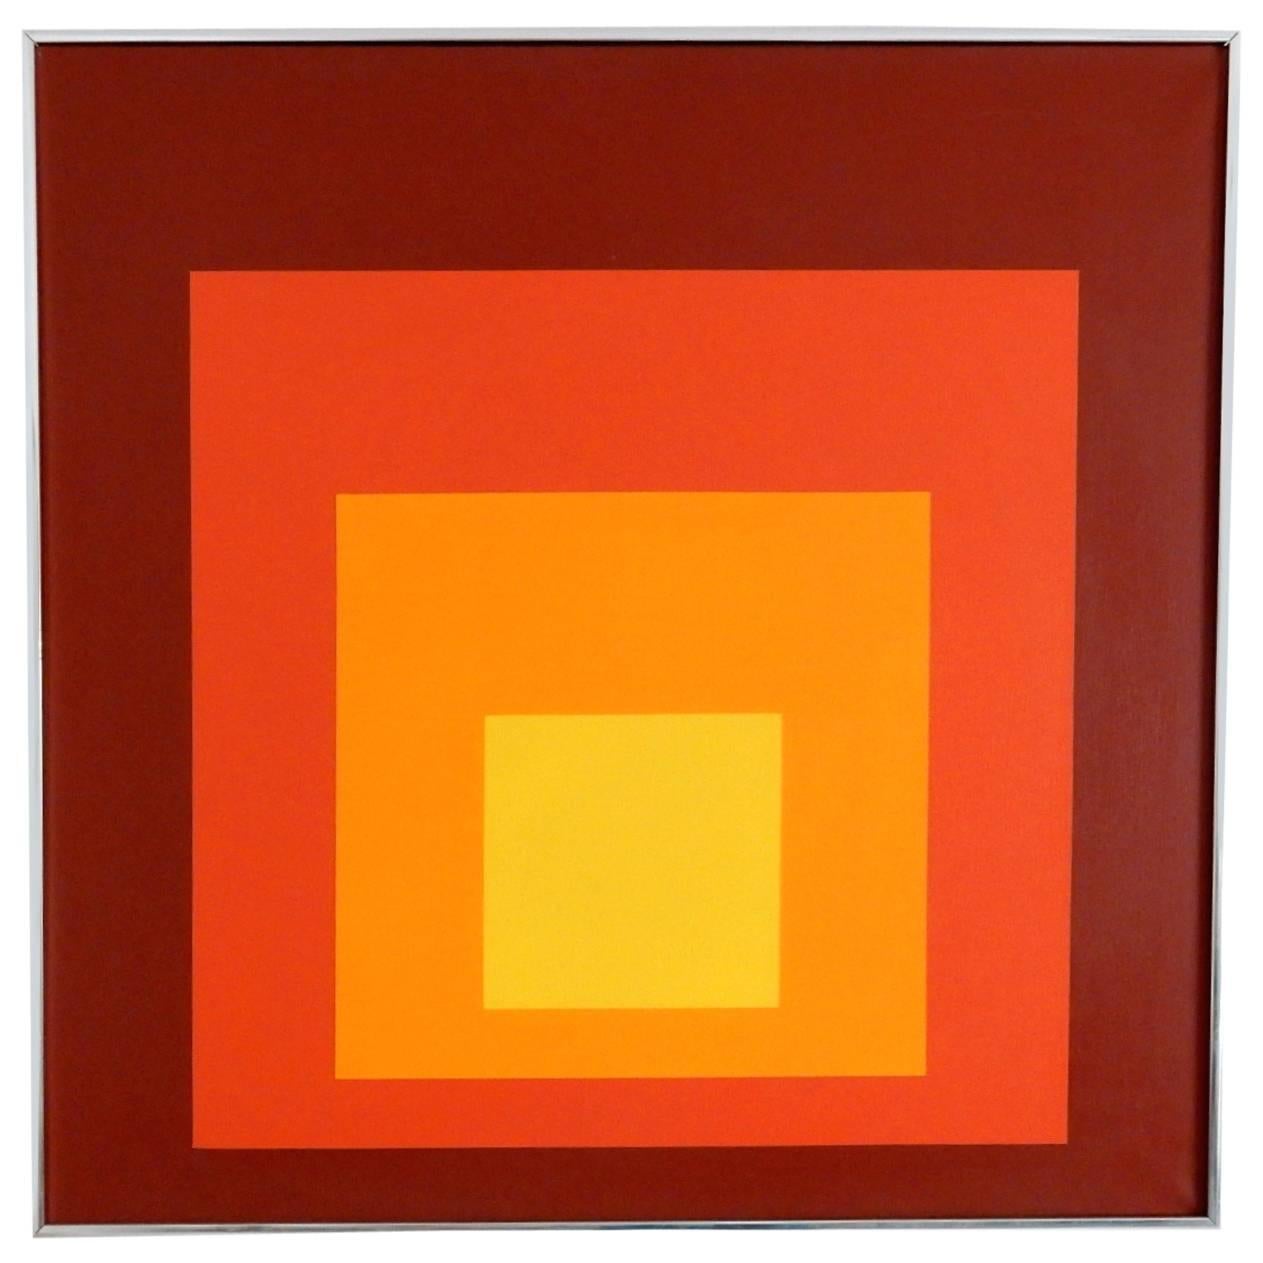 1975 Hard Edge Square Oil Painting on Canvas, in the Manner of Josef Albers